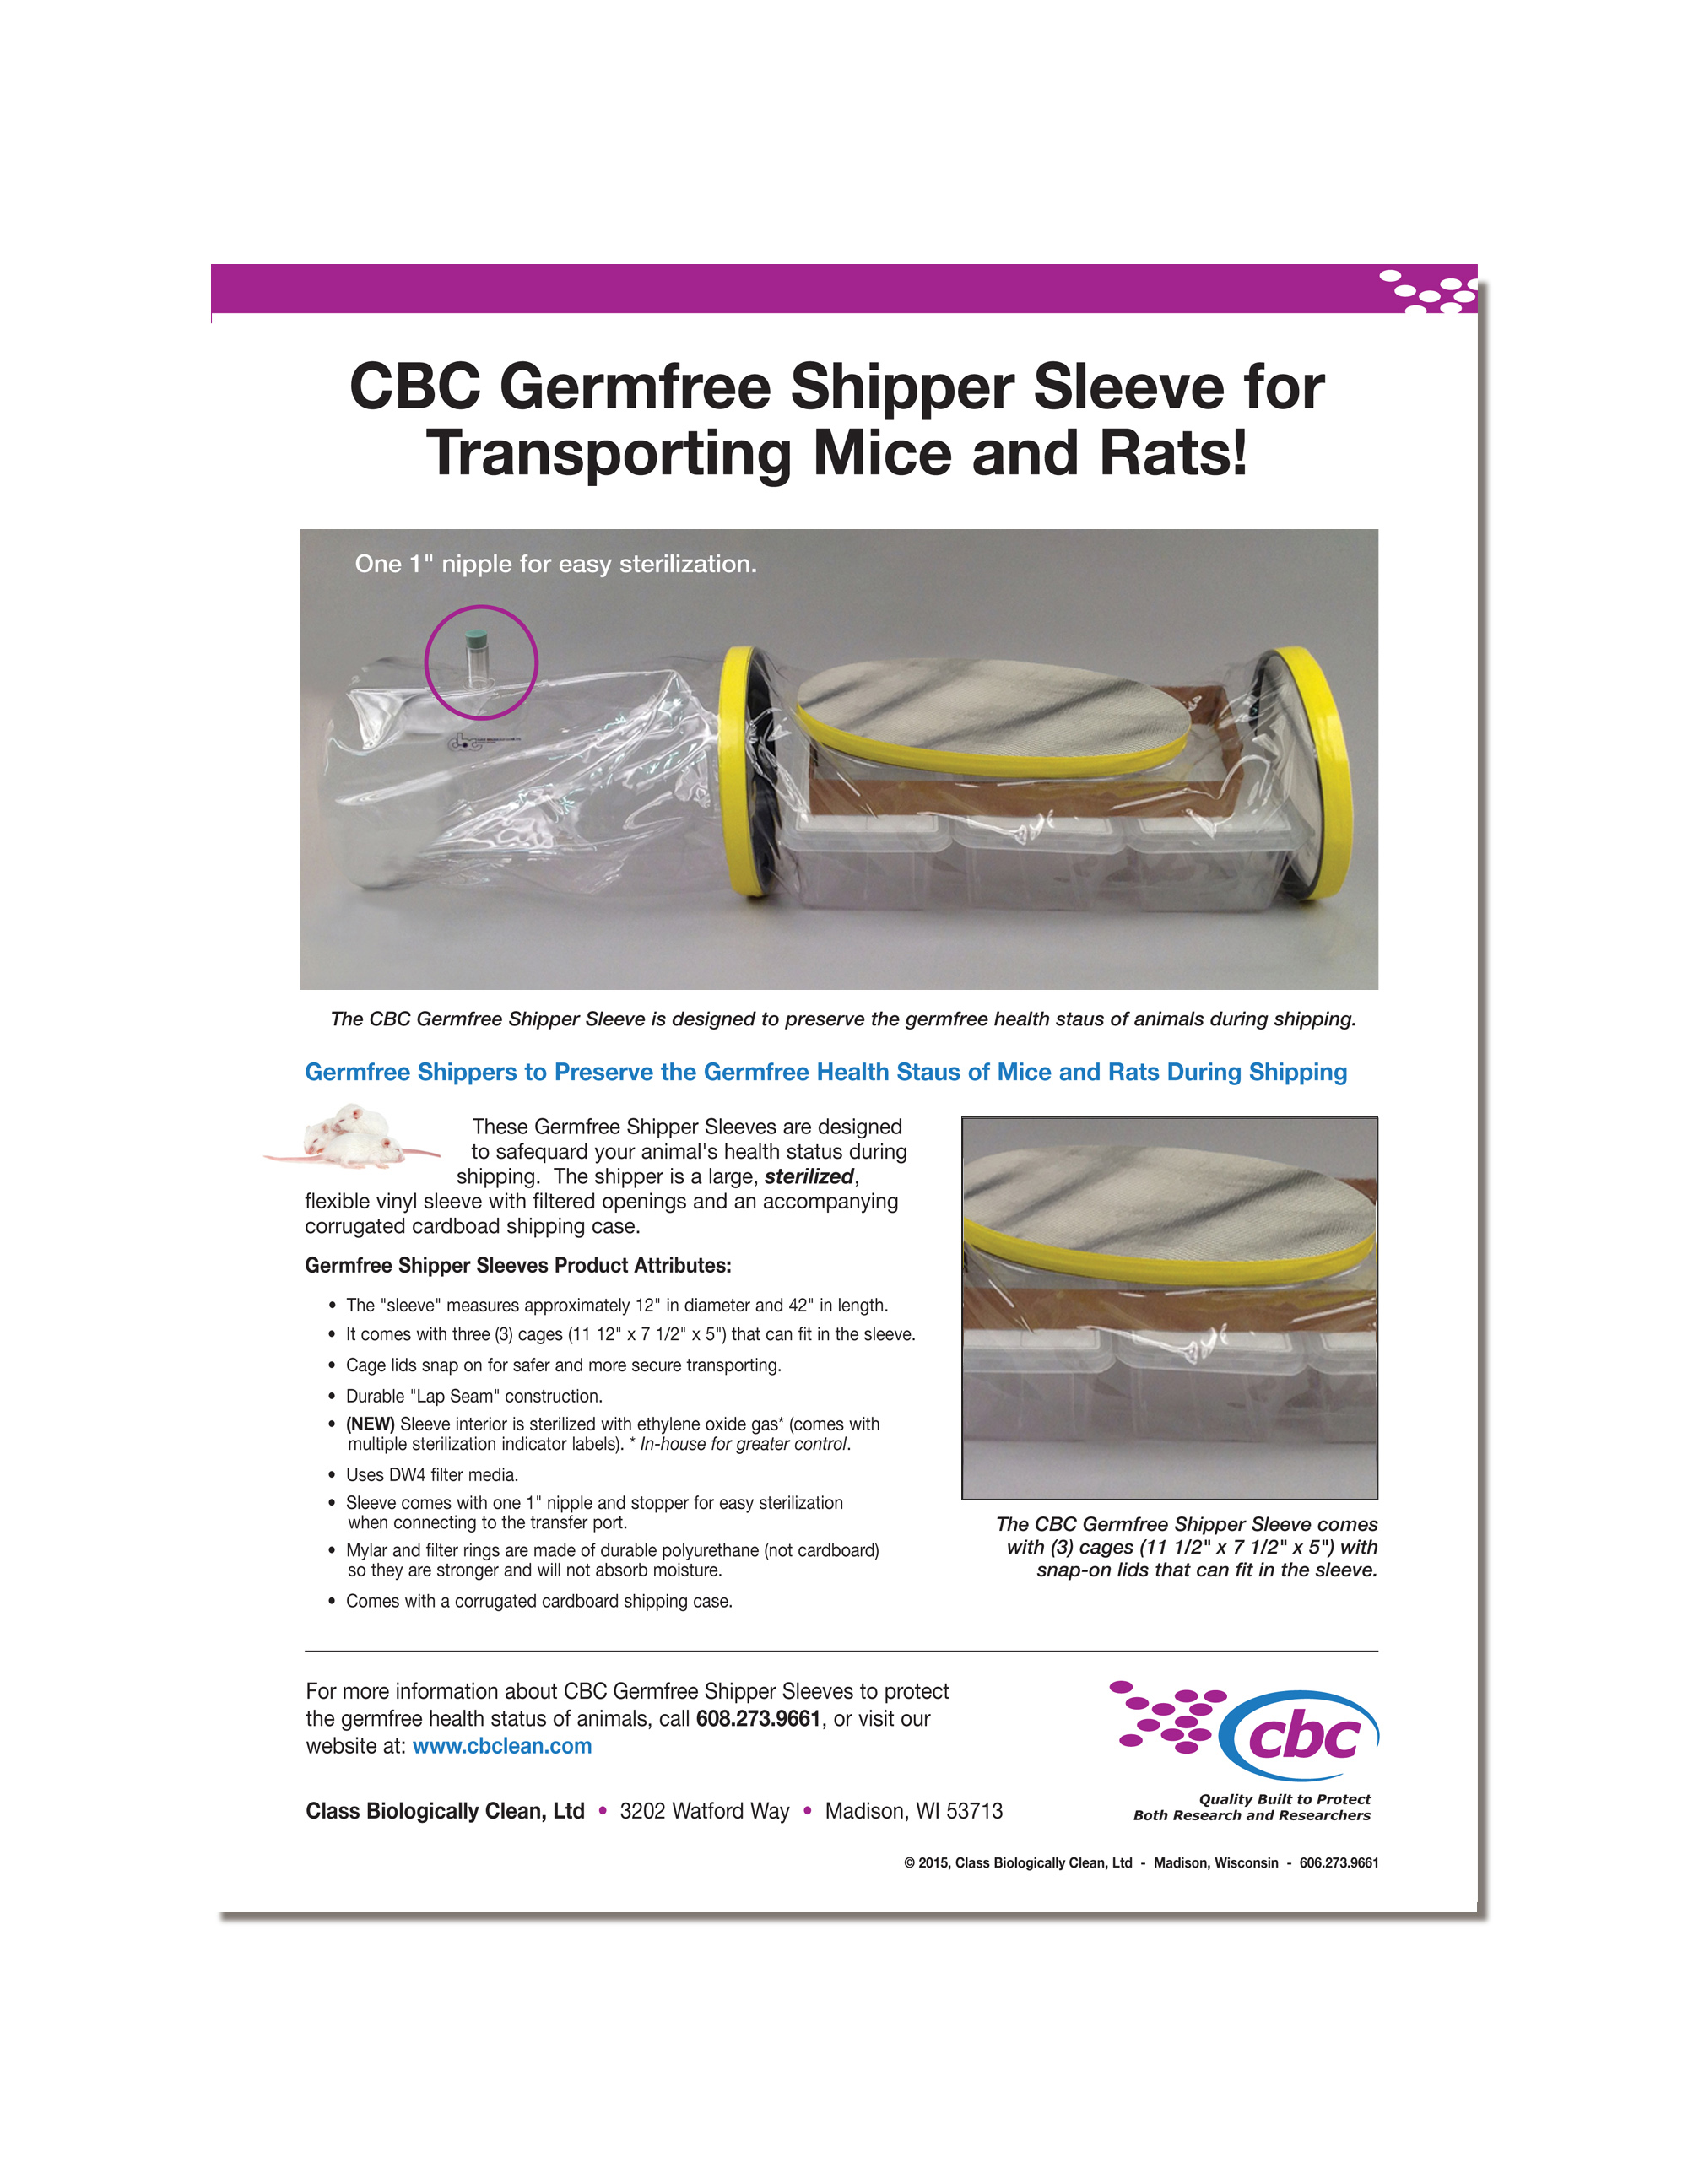 Download a printable flyer about CBC's germ-free shipper sleeve that safeguards your gnotobiotic animal's health status during shipping. Click here to download flyer.